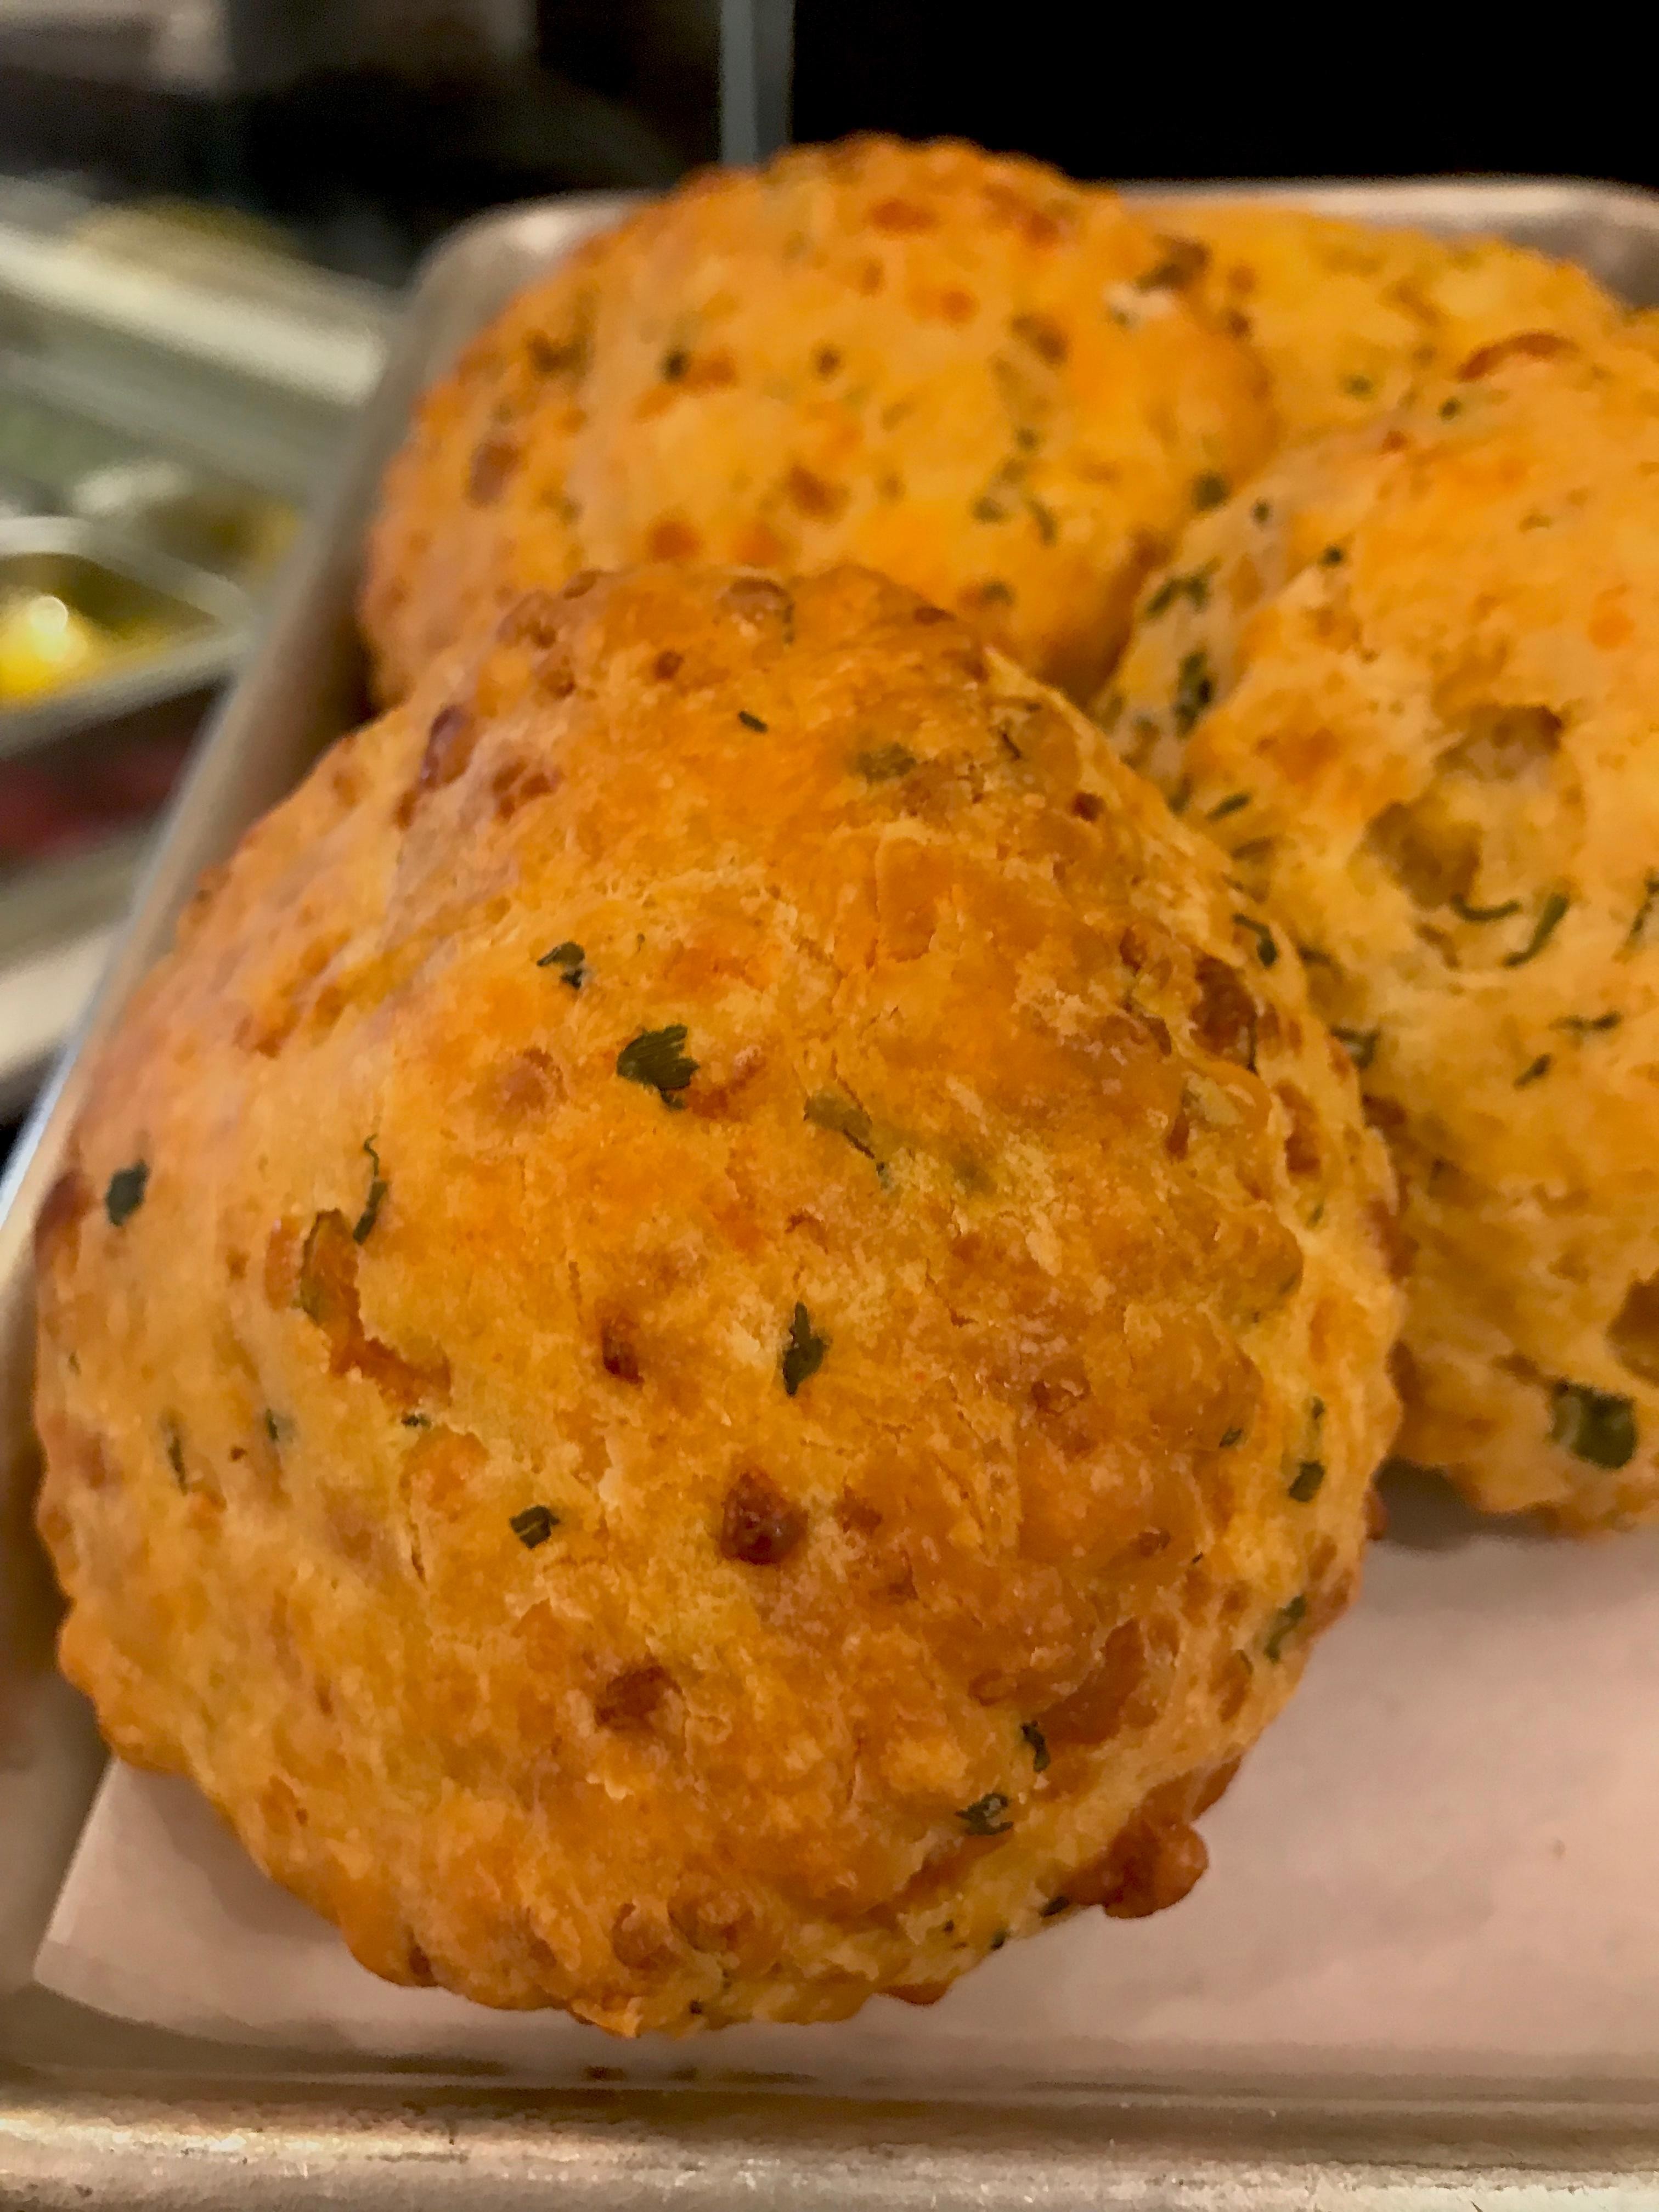 Cheddar Chive Biscuit